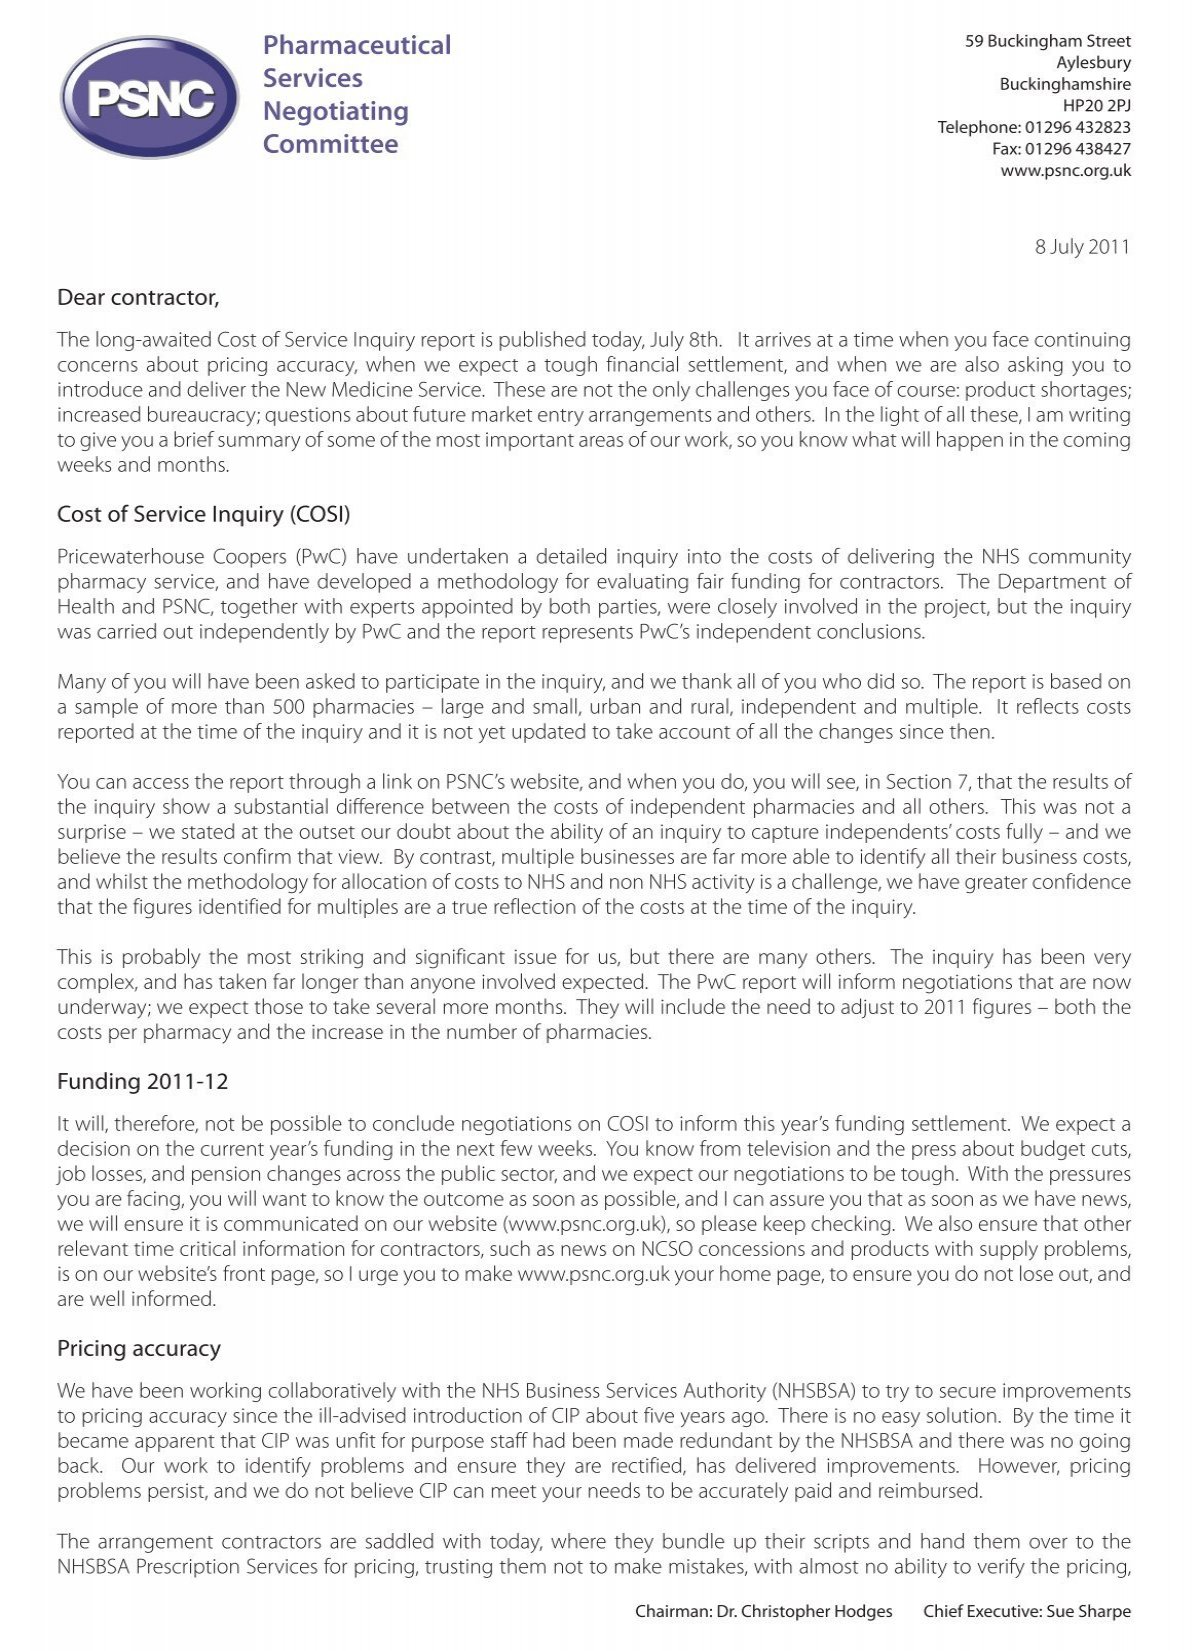 Download A Copy Of The Letter To Contractors From Sue Sharpe Psnc